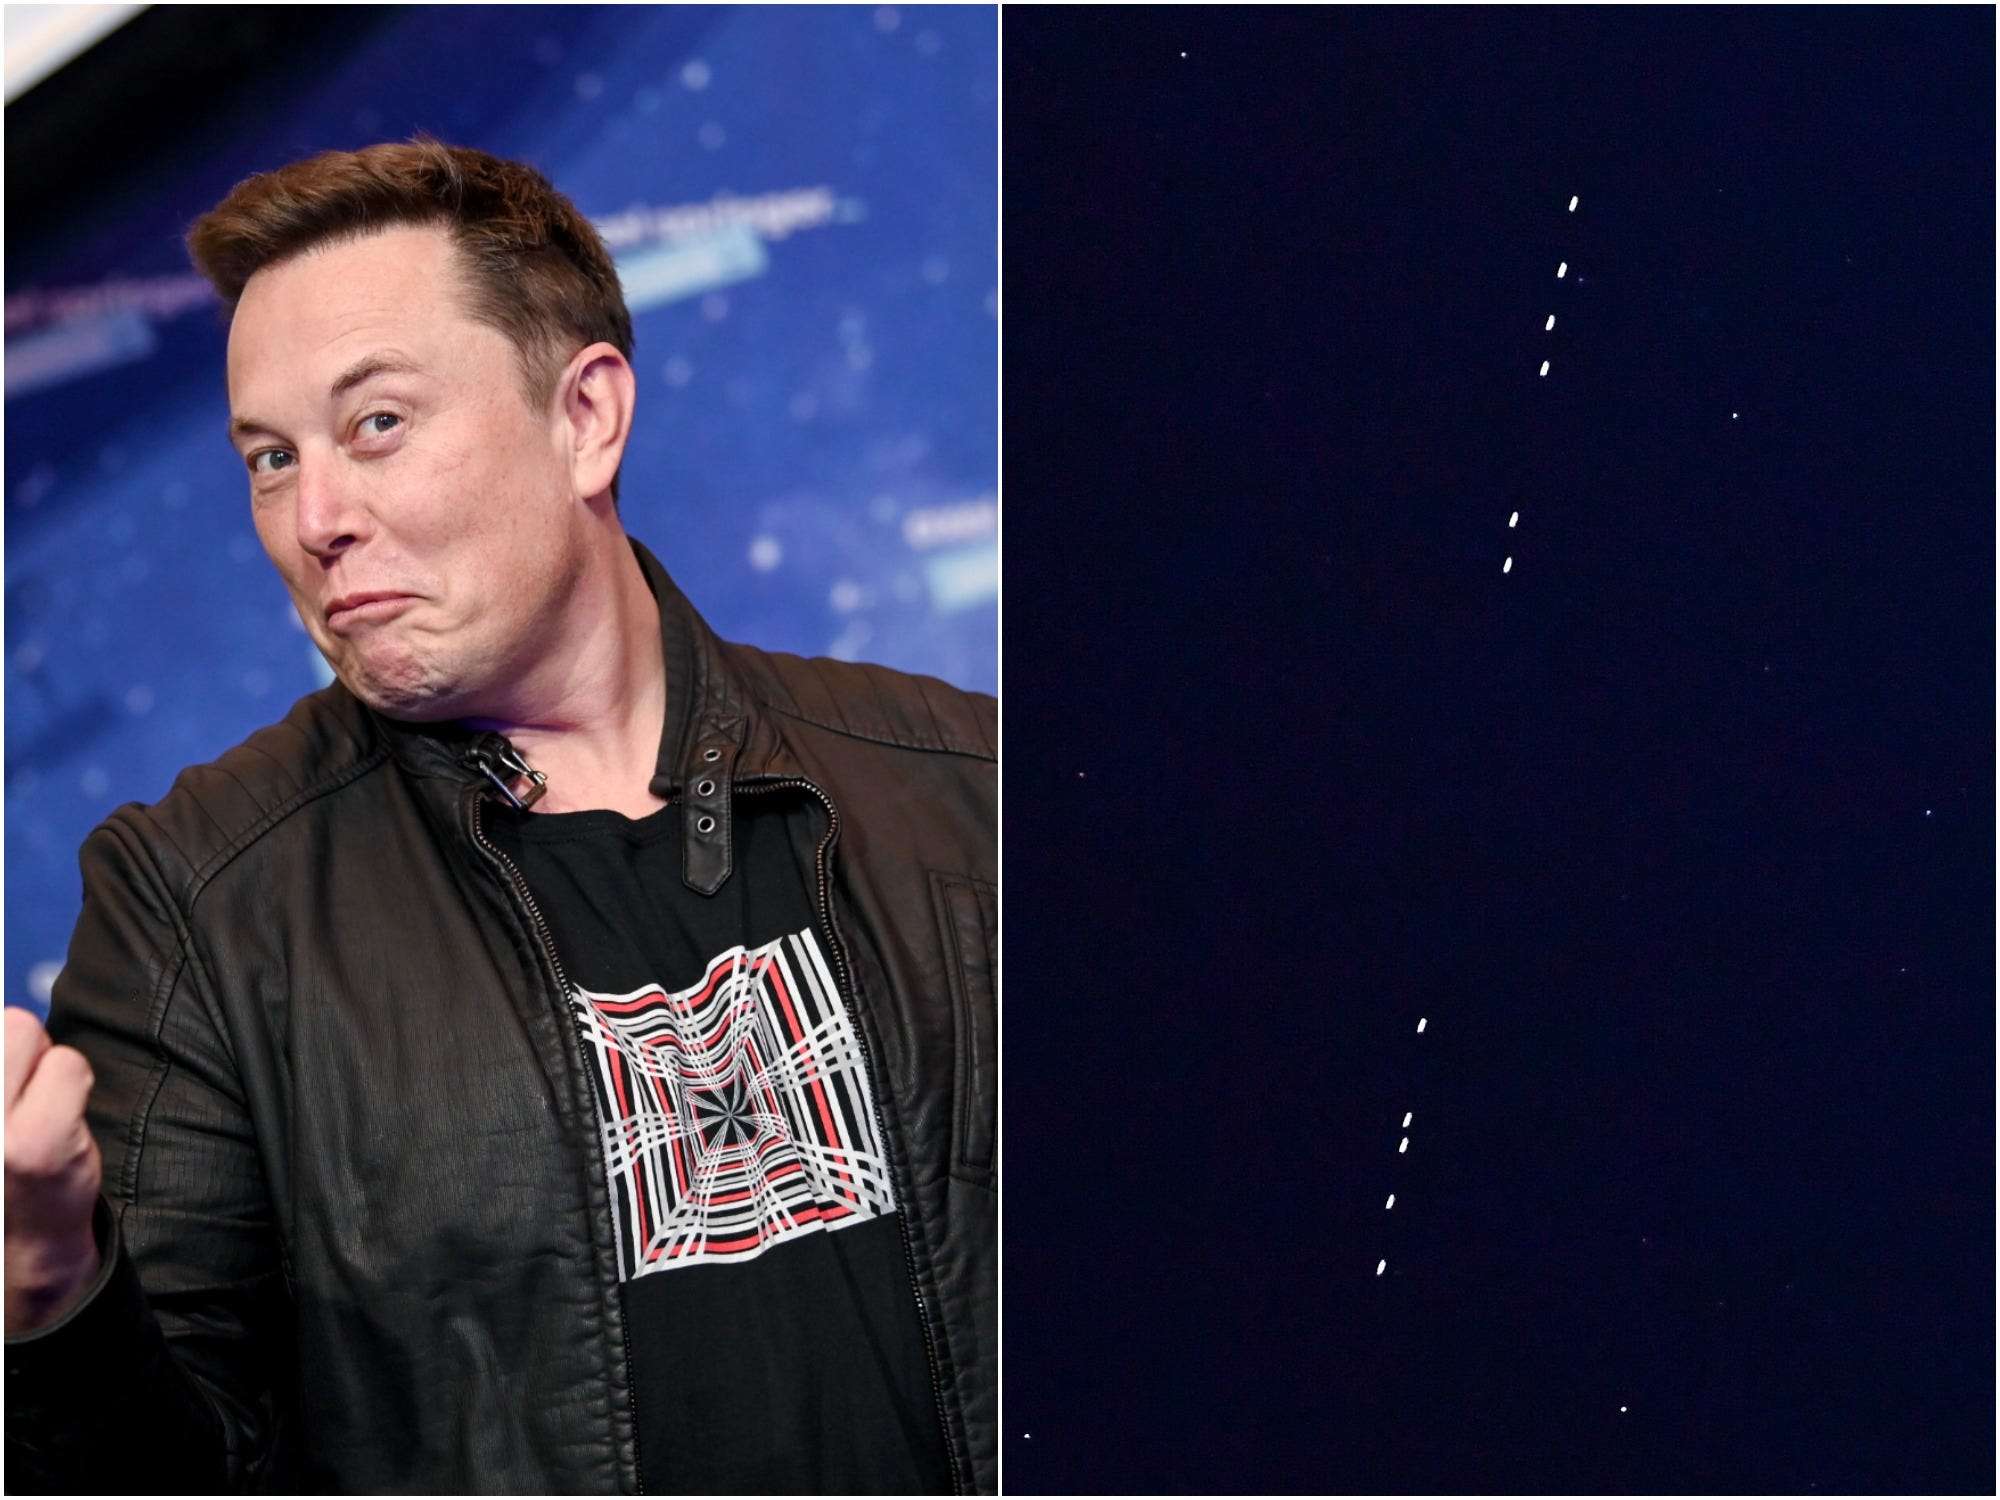 More people across the world are reporting sightings of SpaceX's Starlink satellites, which tend to resemble a chain of fairy lights zooming across th